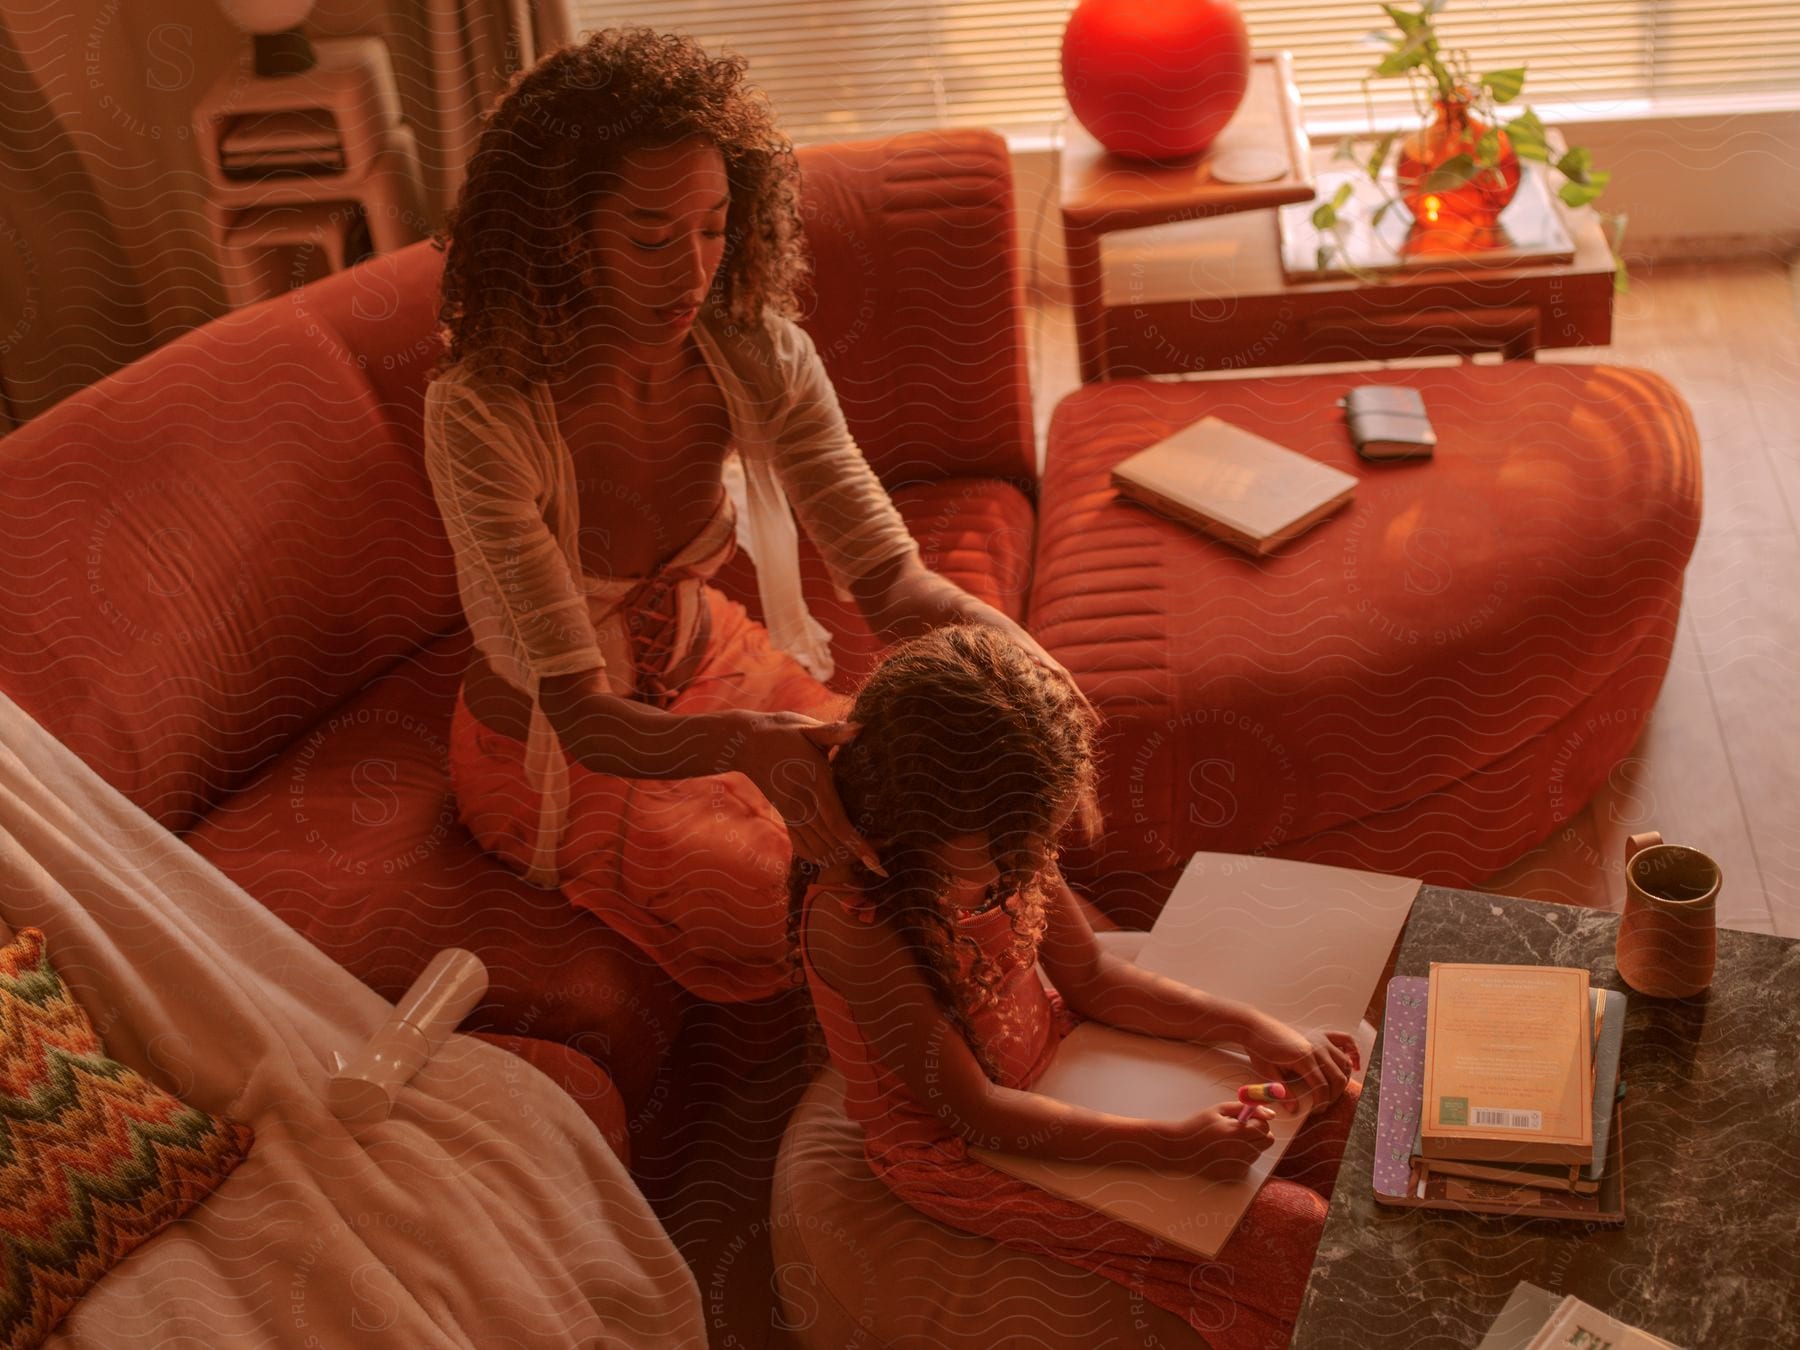 As the mother does her daughter's hair, the daughter makes a drawing in a notebook